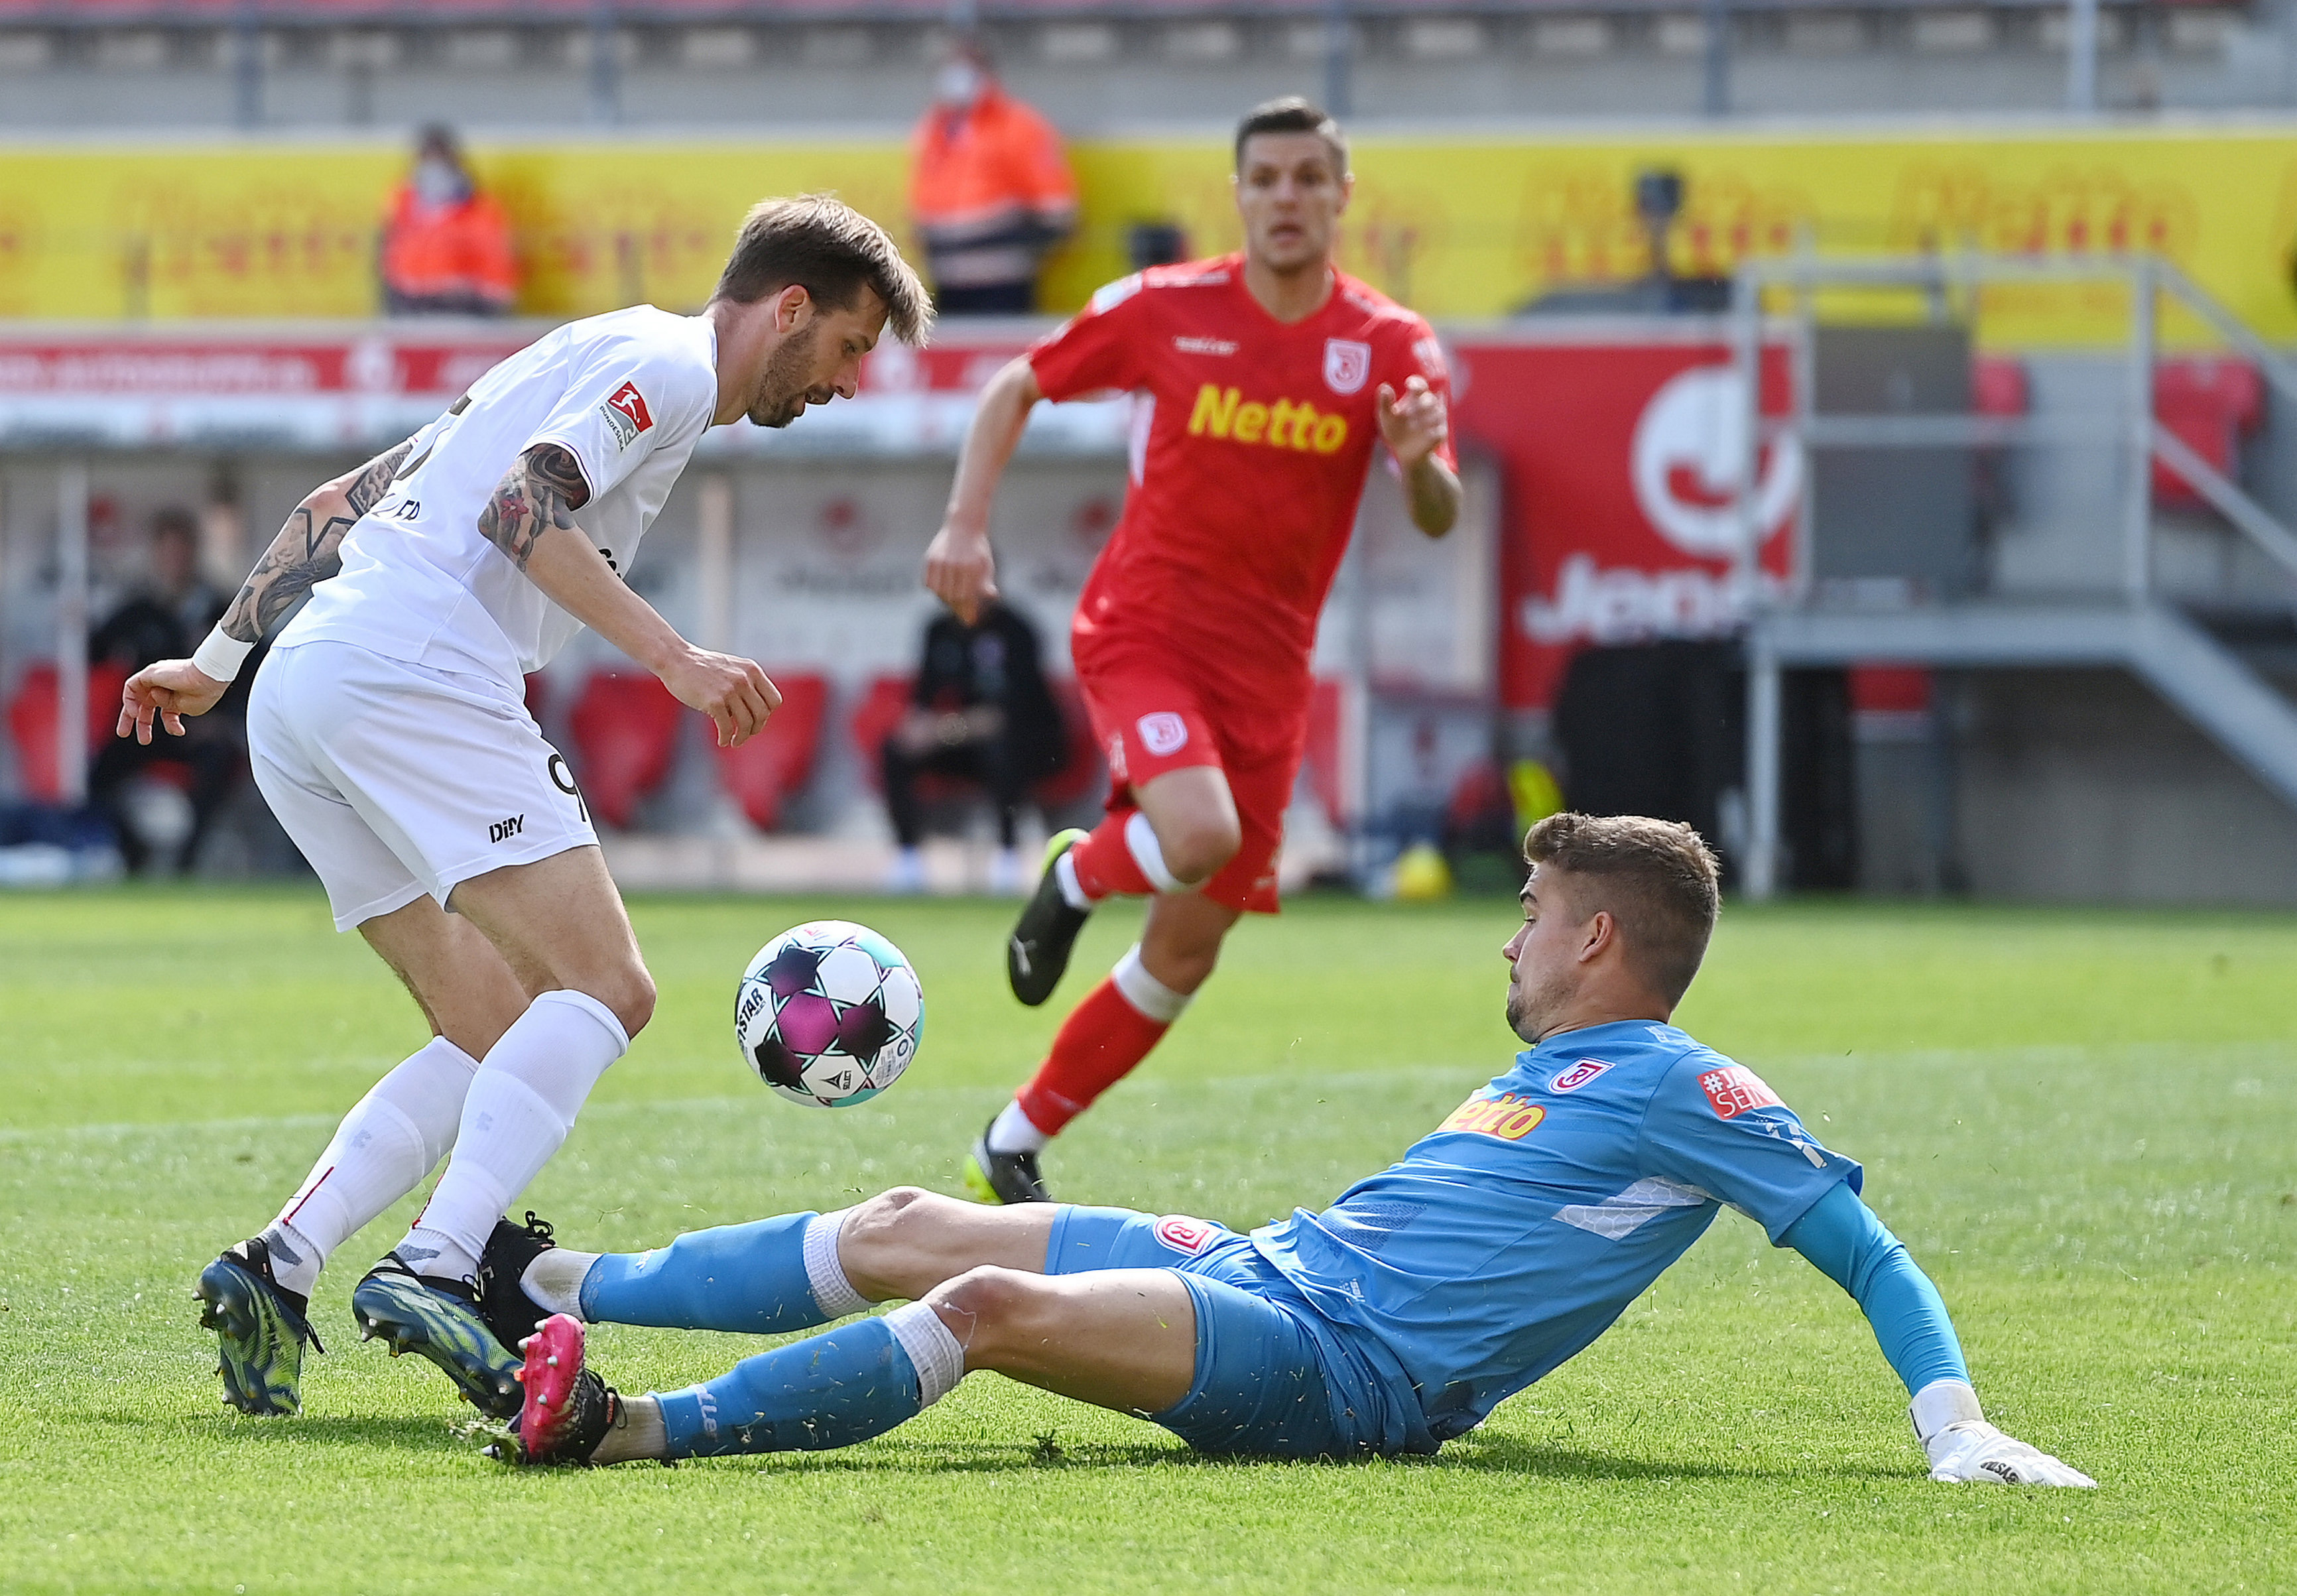 Guido Burgstaller had an early opportunity to open the scoring but was denied by Regensburg keeper Alexander Meyer as he tried to take the ball around him.